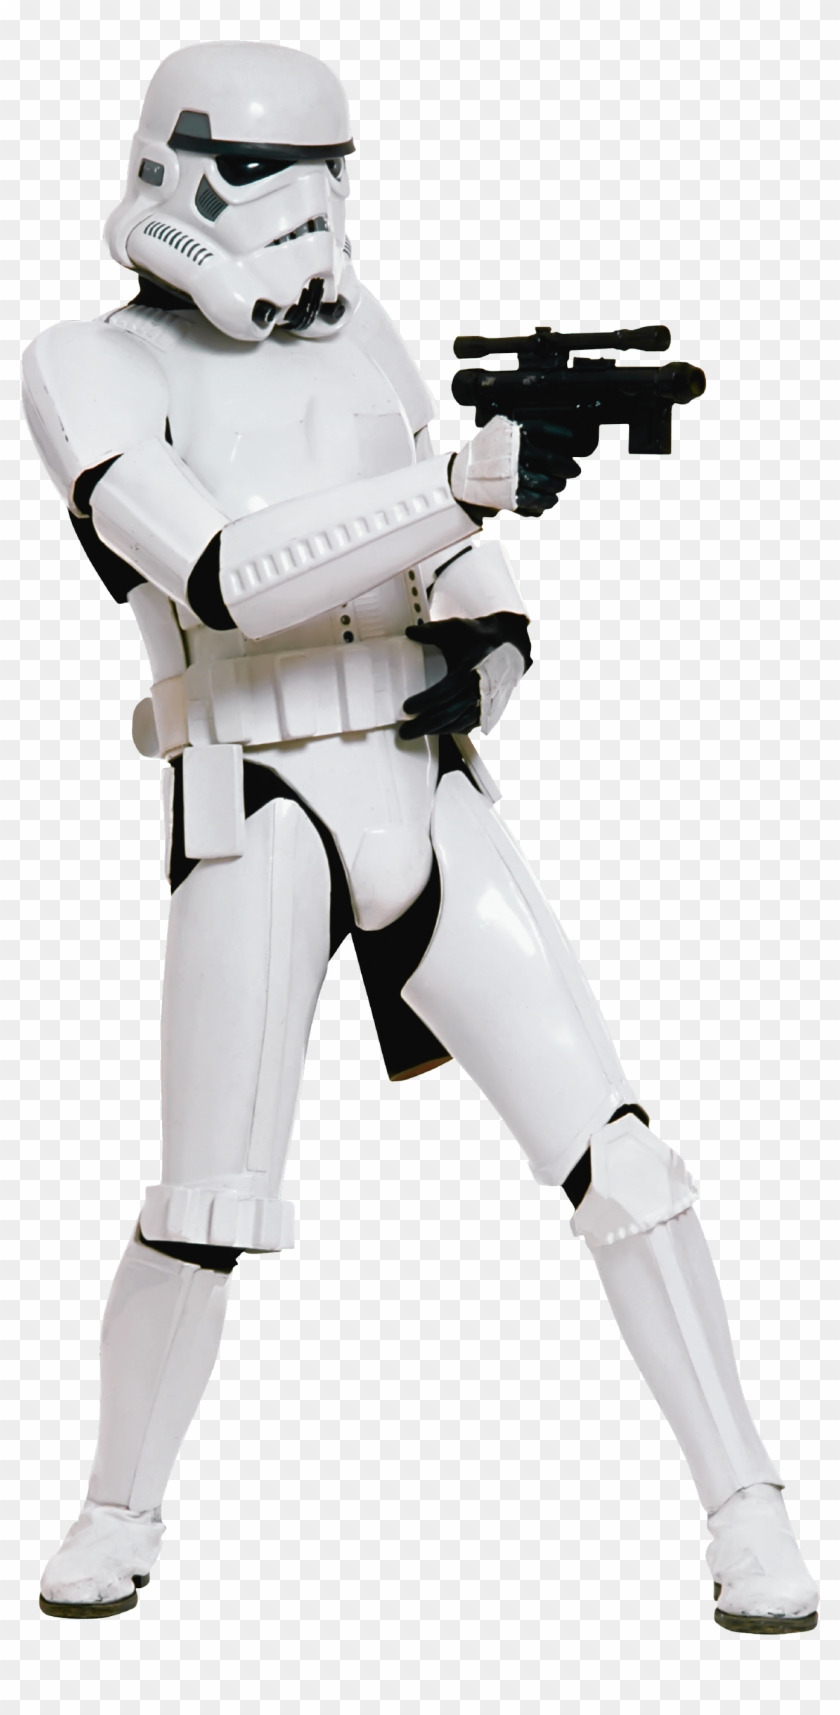 Stormtrooper Png Image - Starship Trooper Star Wars Clipart #90202